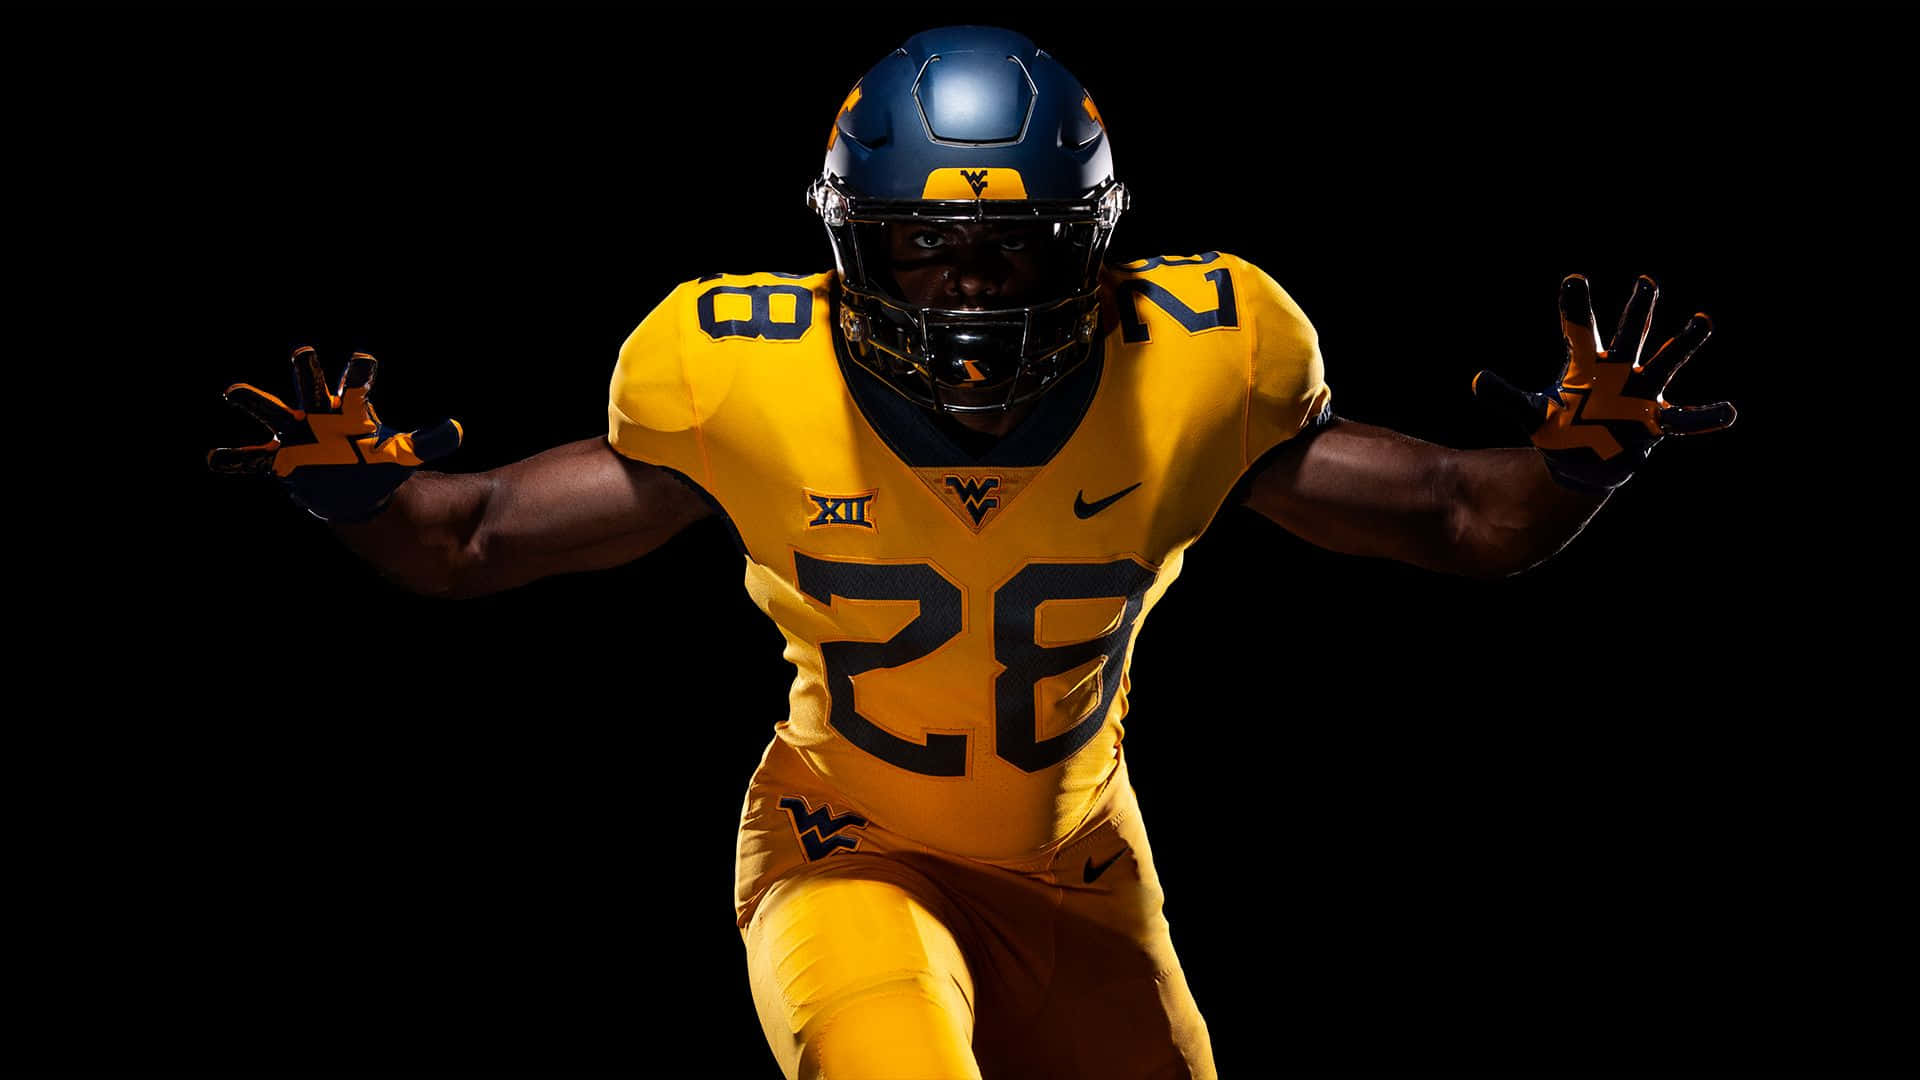 Gearing up for West Virginia Football Wallpaper